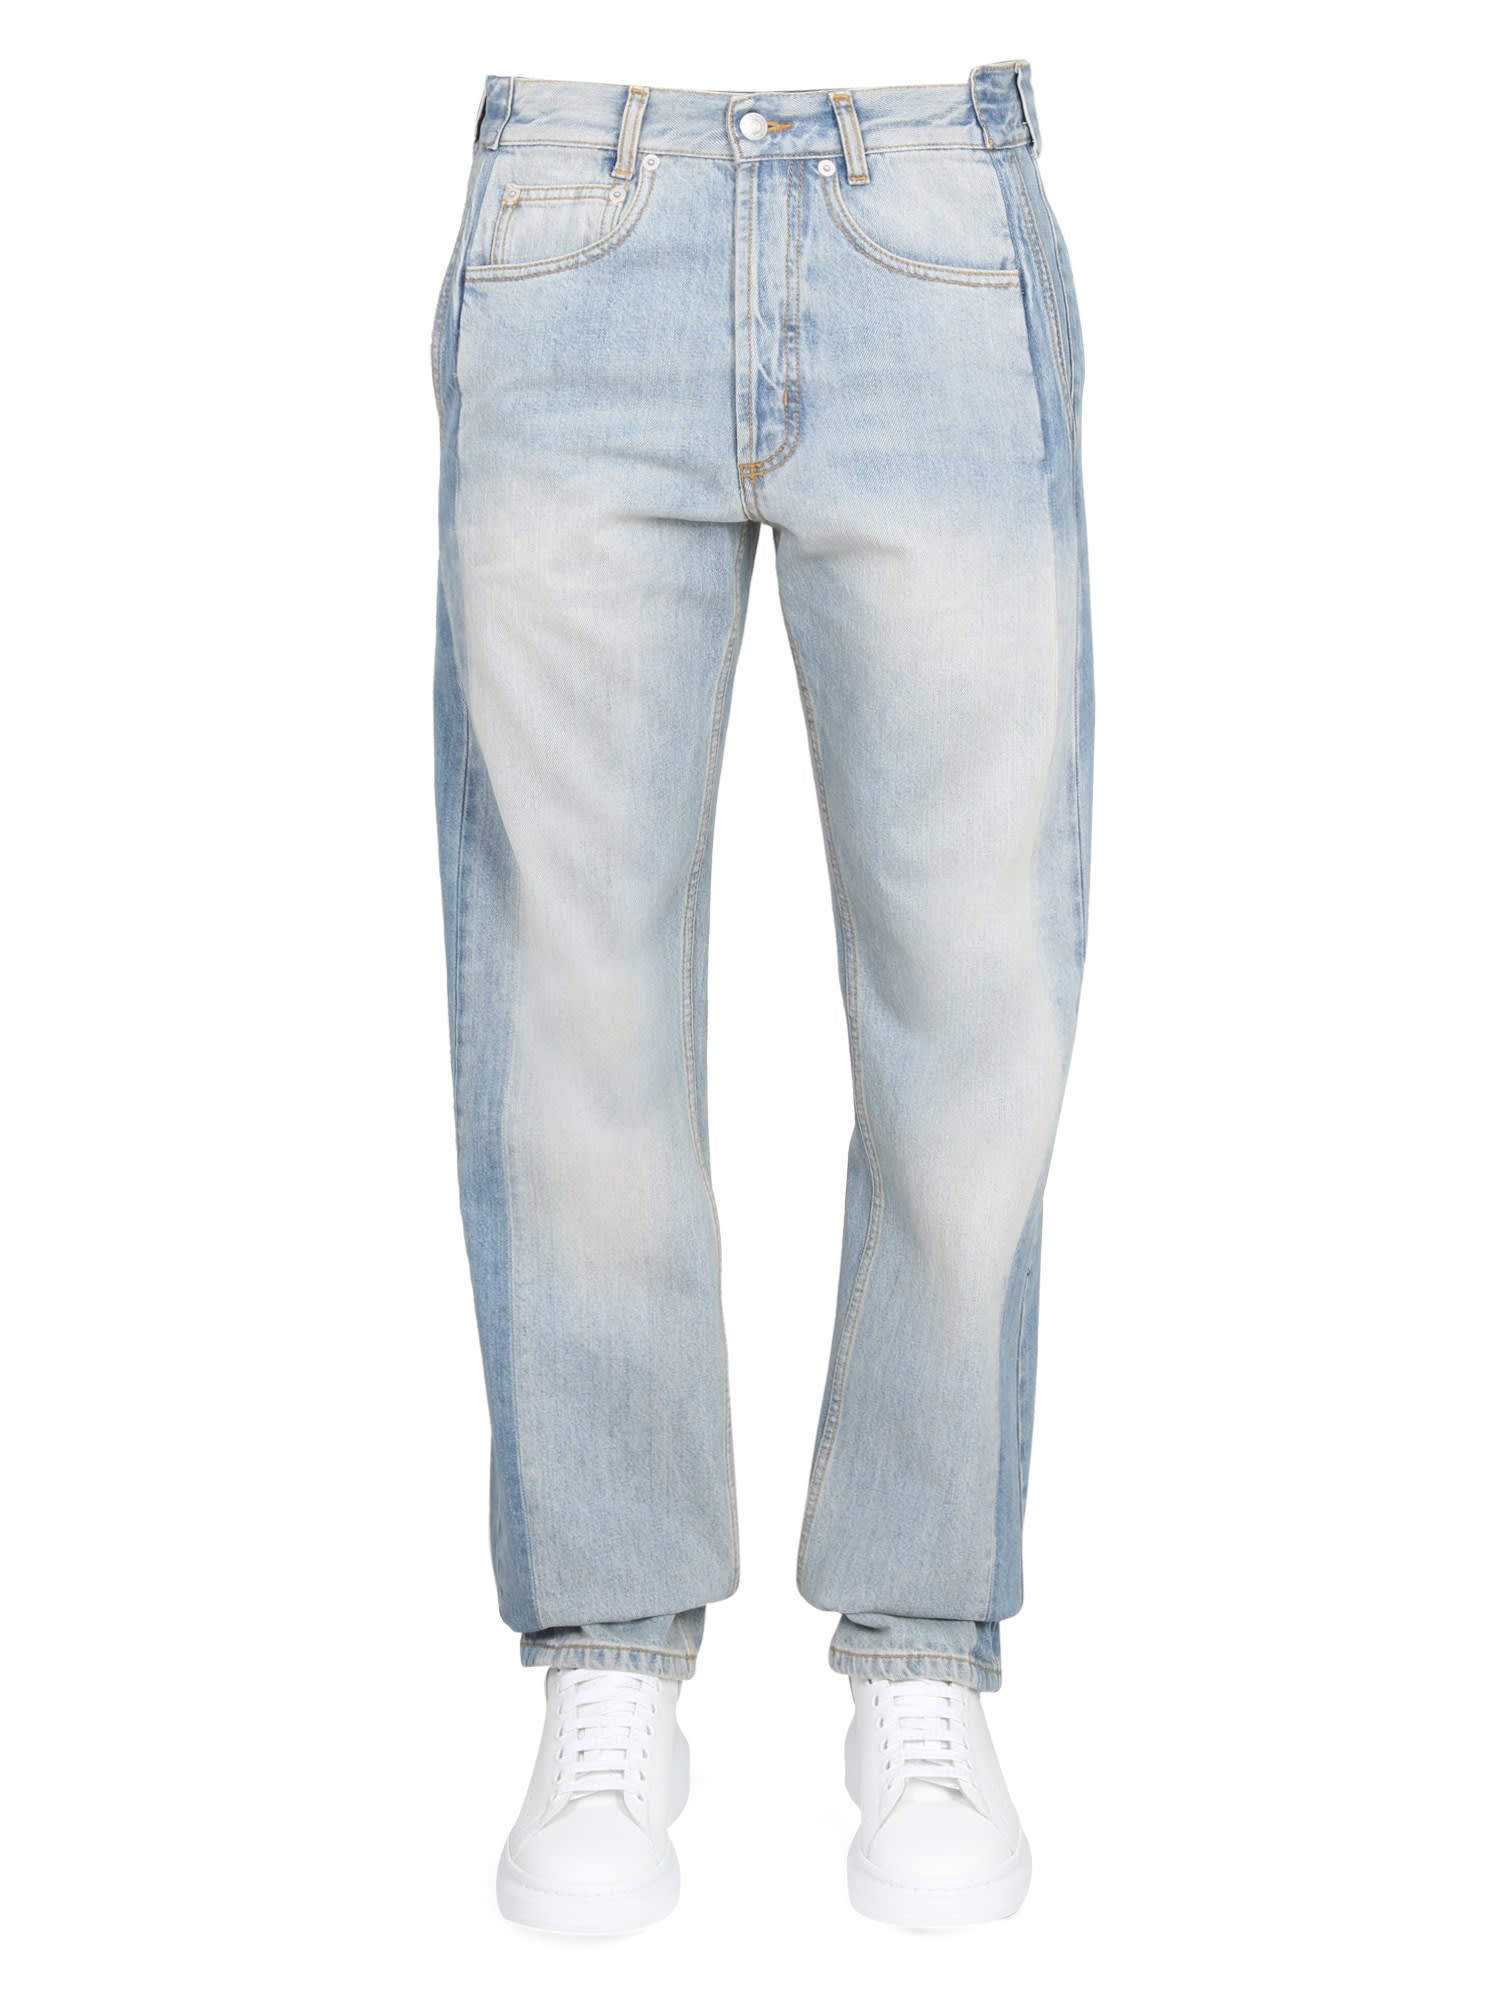 ALEXANDER MCQUEEN WORKER JEANS WITH PATCHES